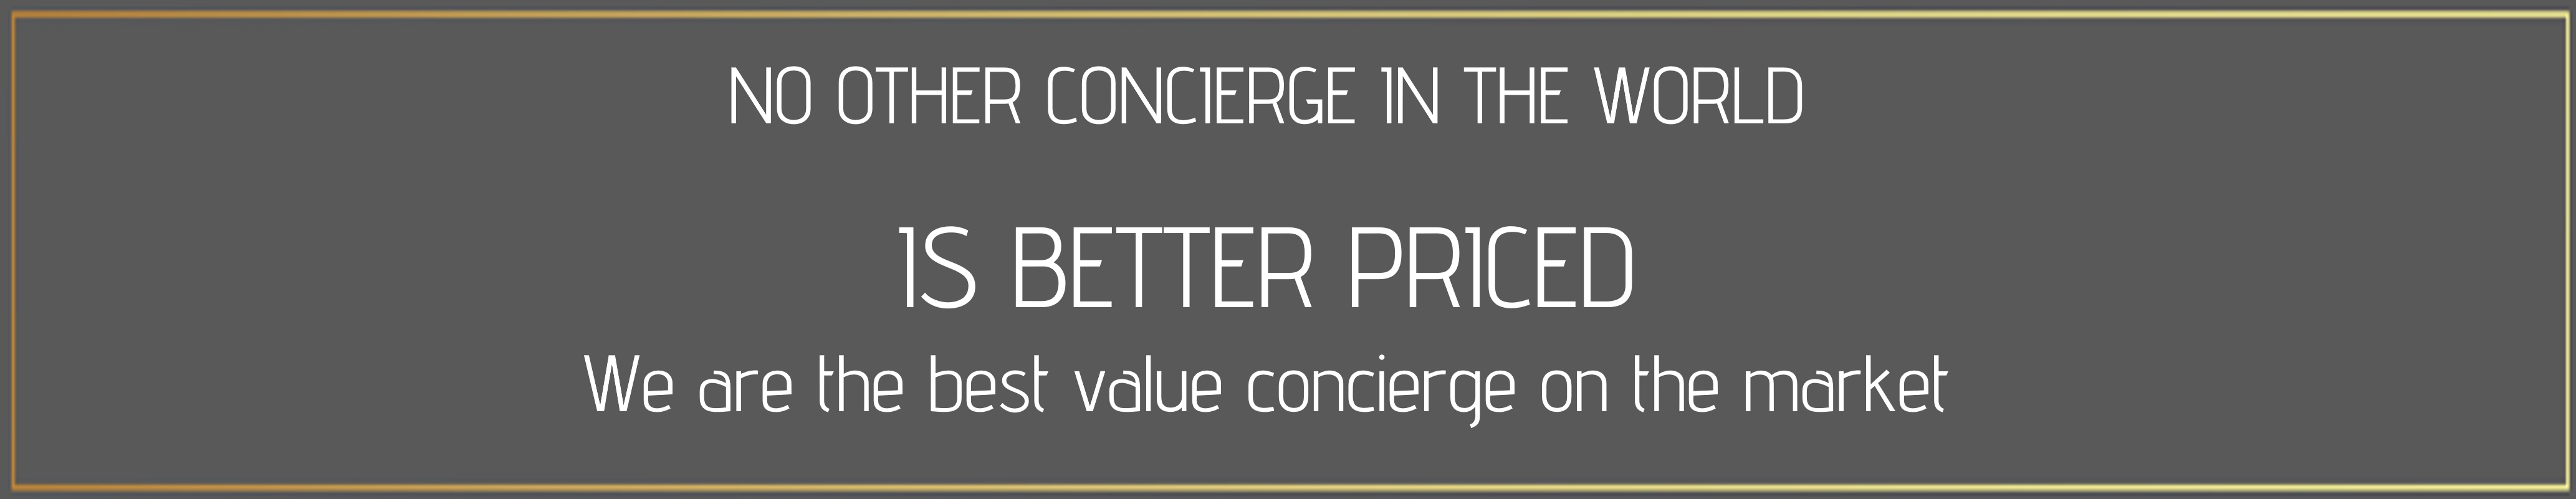 sincura is the best prcied concierge on the market